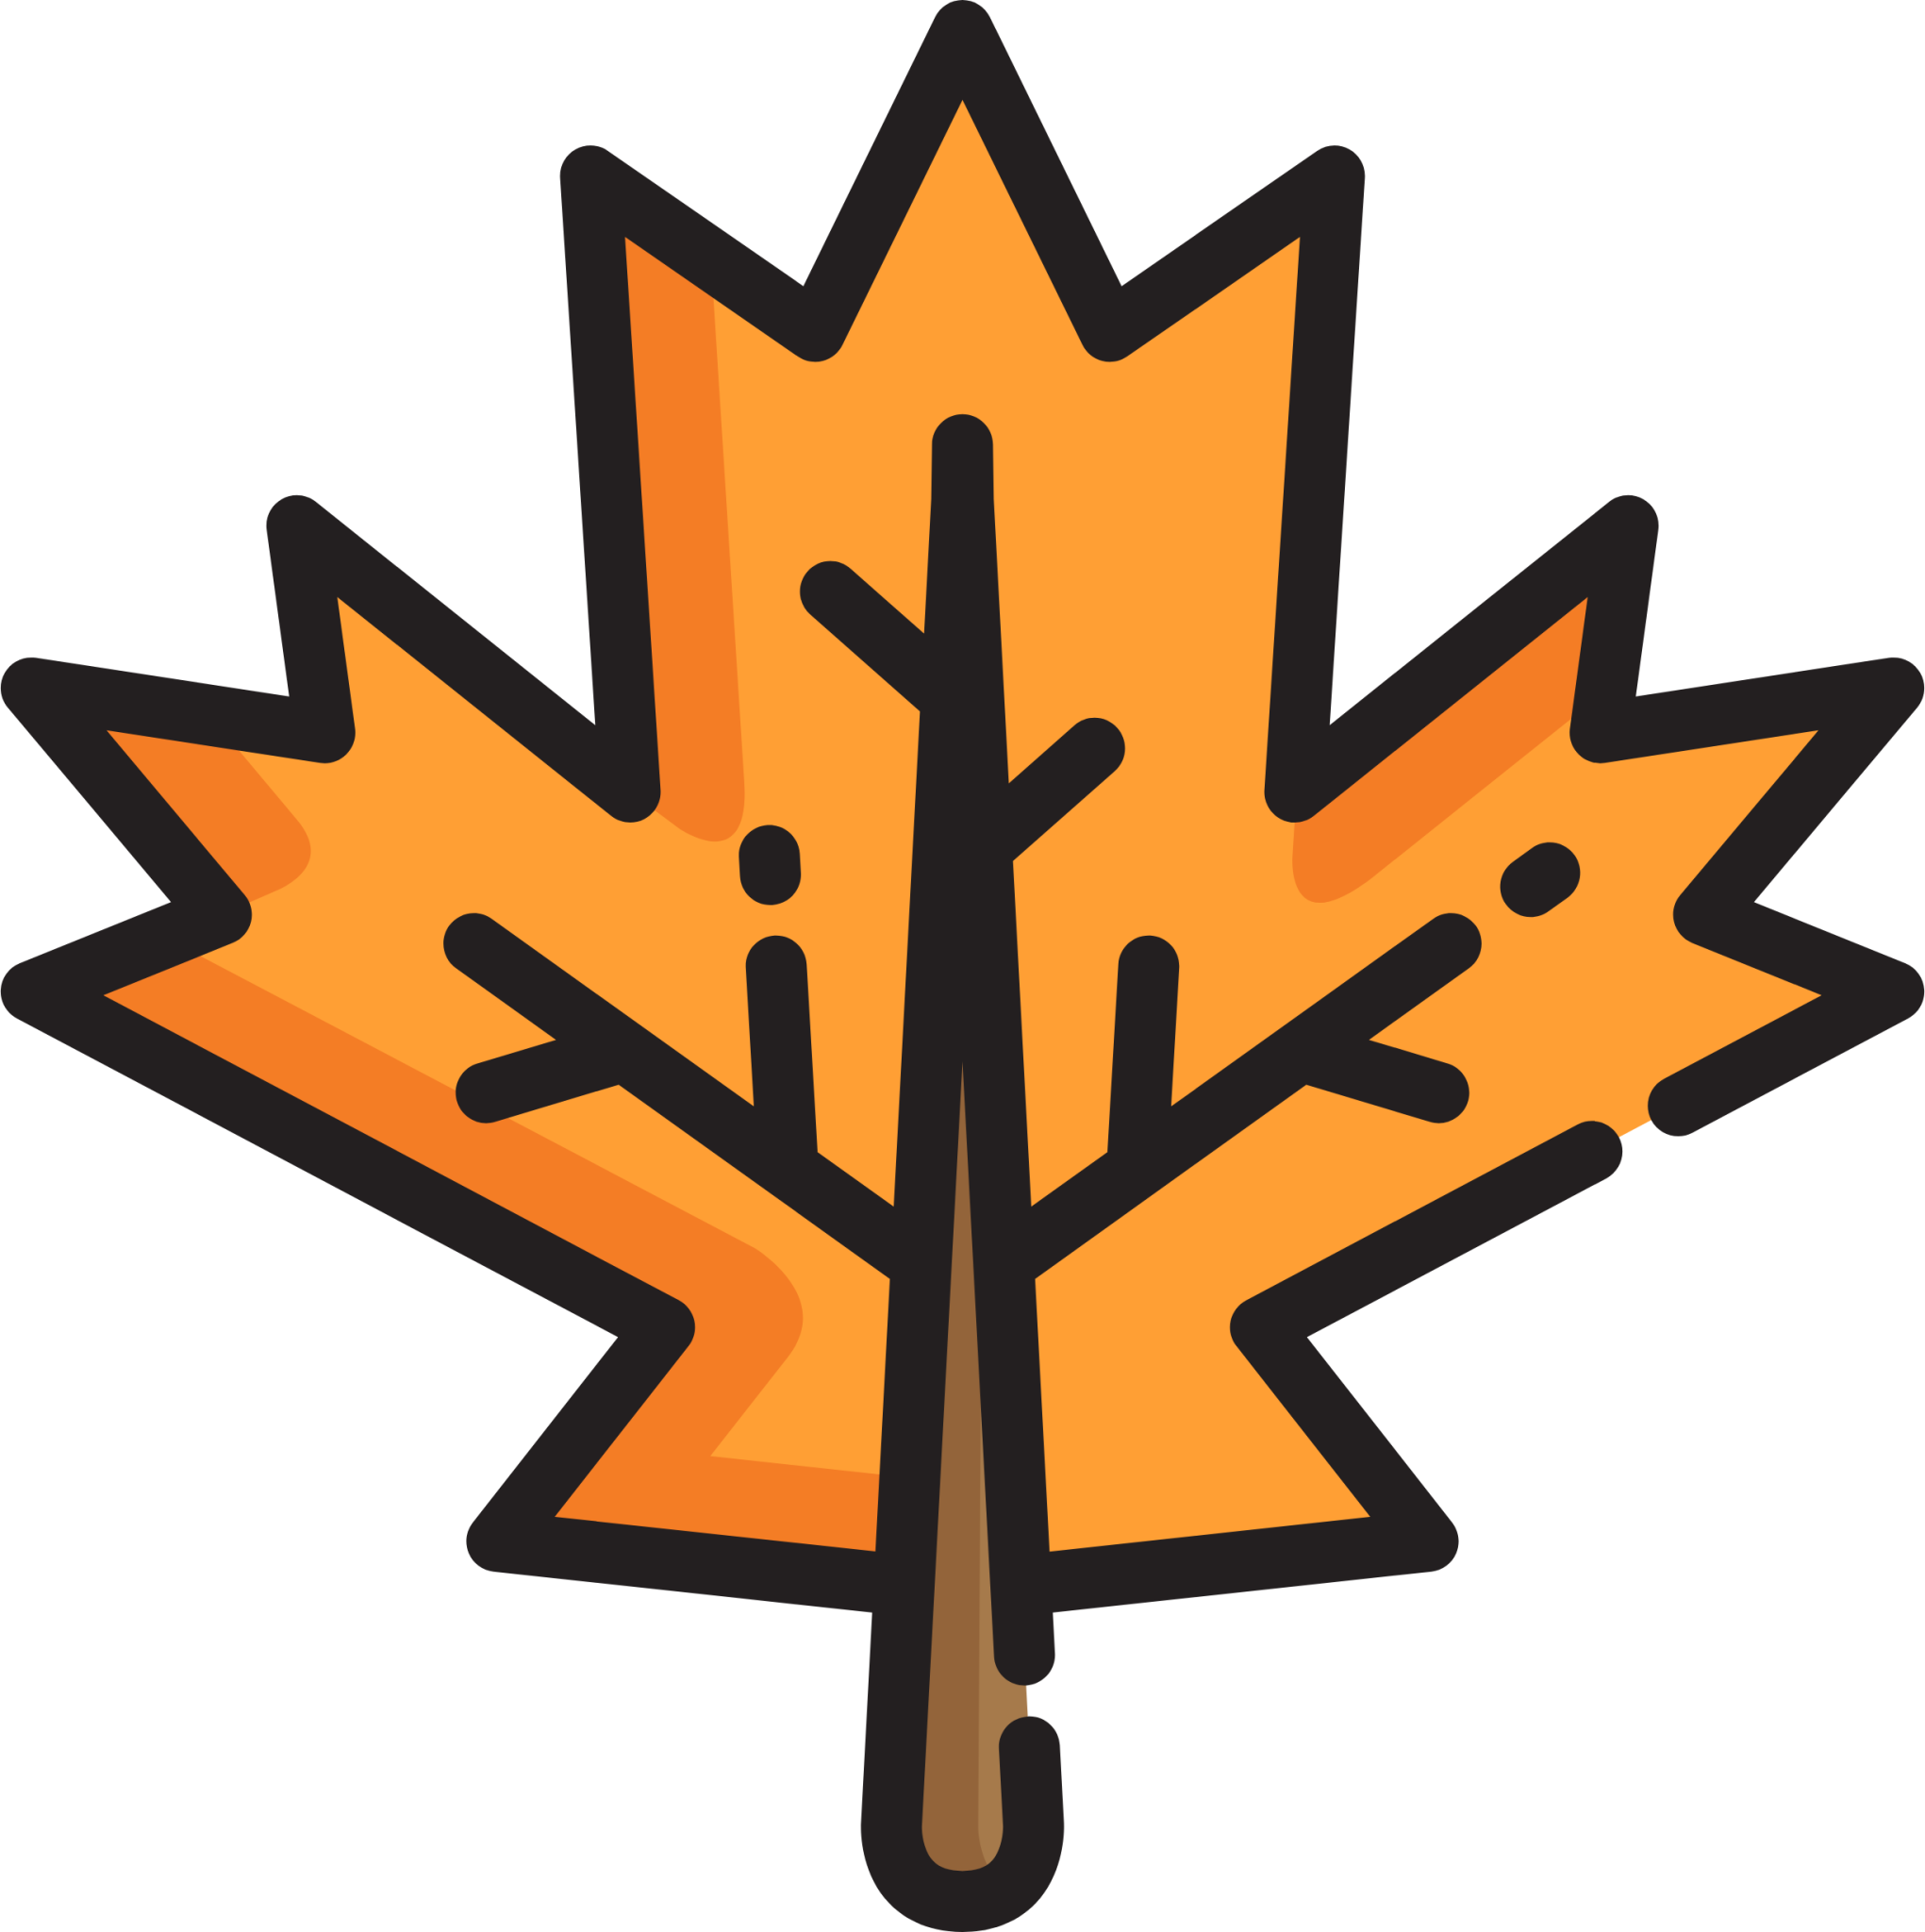 maple leaf icon png